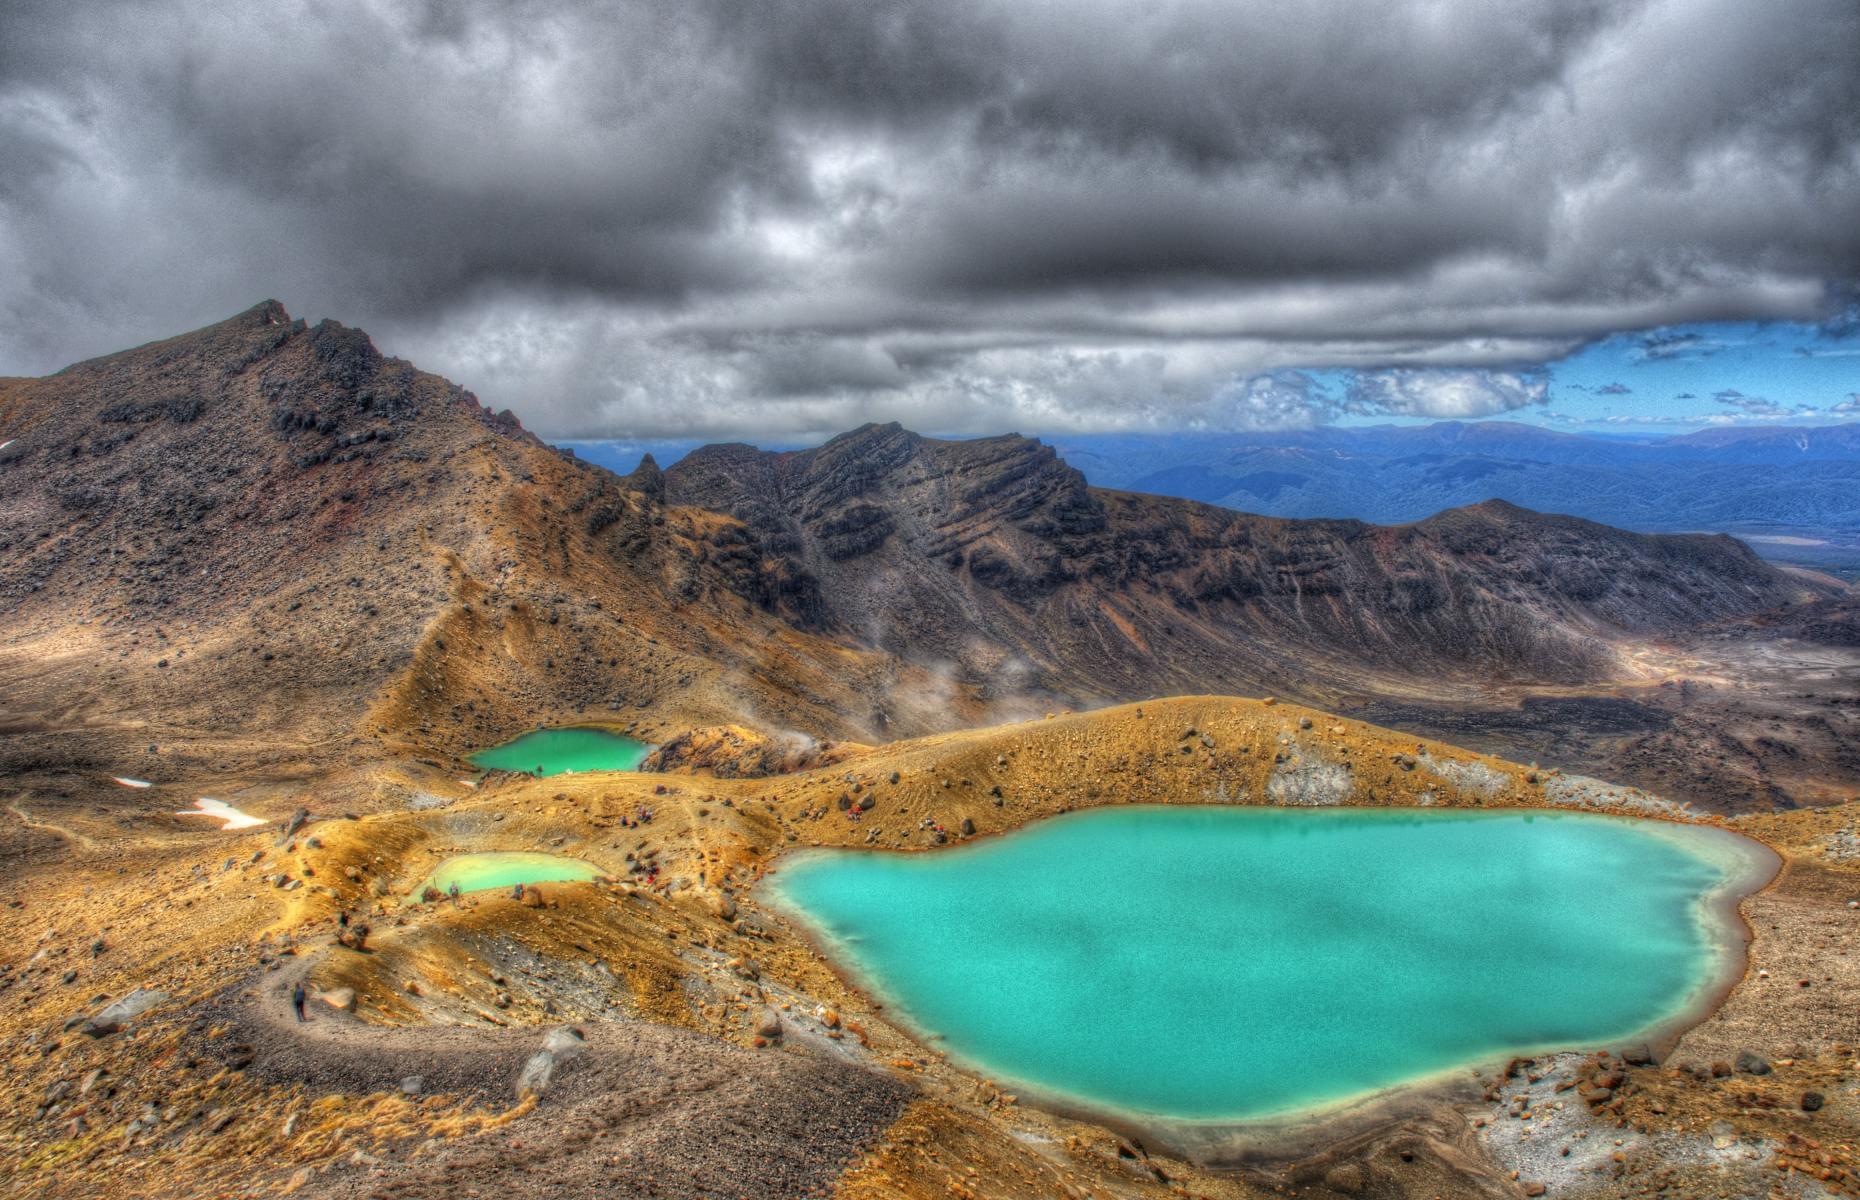 <p>The central North Island region features the one-day Tongariro Alpine Crossing. Famed for its views of magnificent lava fields, smoking craters, volcanic lakes and Mount Ngauruhoe (known as Mount Doom in <em>The Lord of the Rings</em>), it's lauded as one of the world's best one-day hikes. In winter, the track is covered in snow and ice. The hike takes six to eight hours to complete and covers around 12 miles (19.4km). Note that it's a point-to-point hike, so travellers are advised to arrange pick-up at the end of the trail.</p>